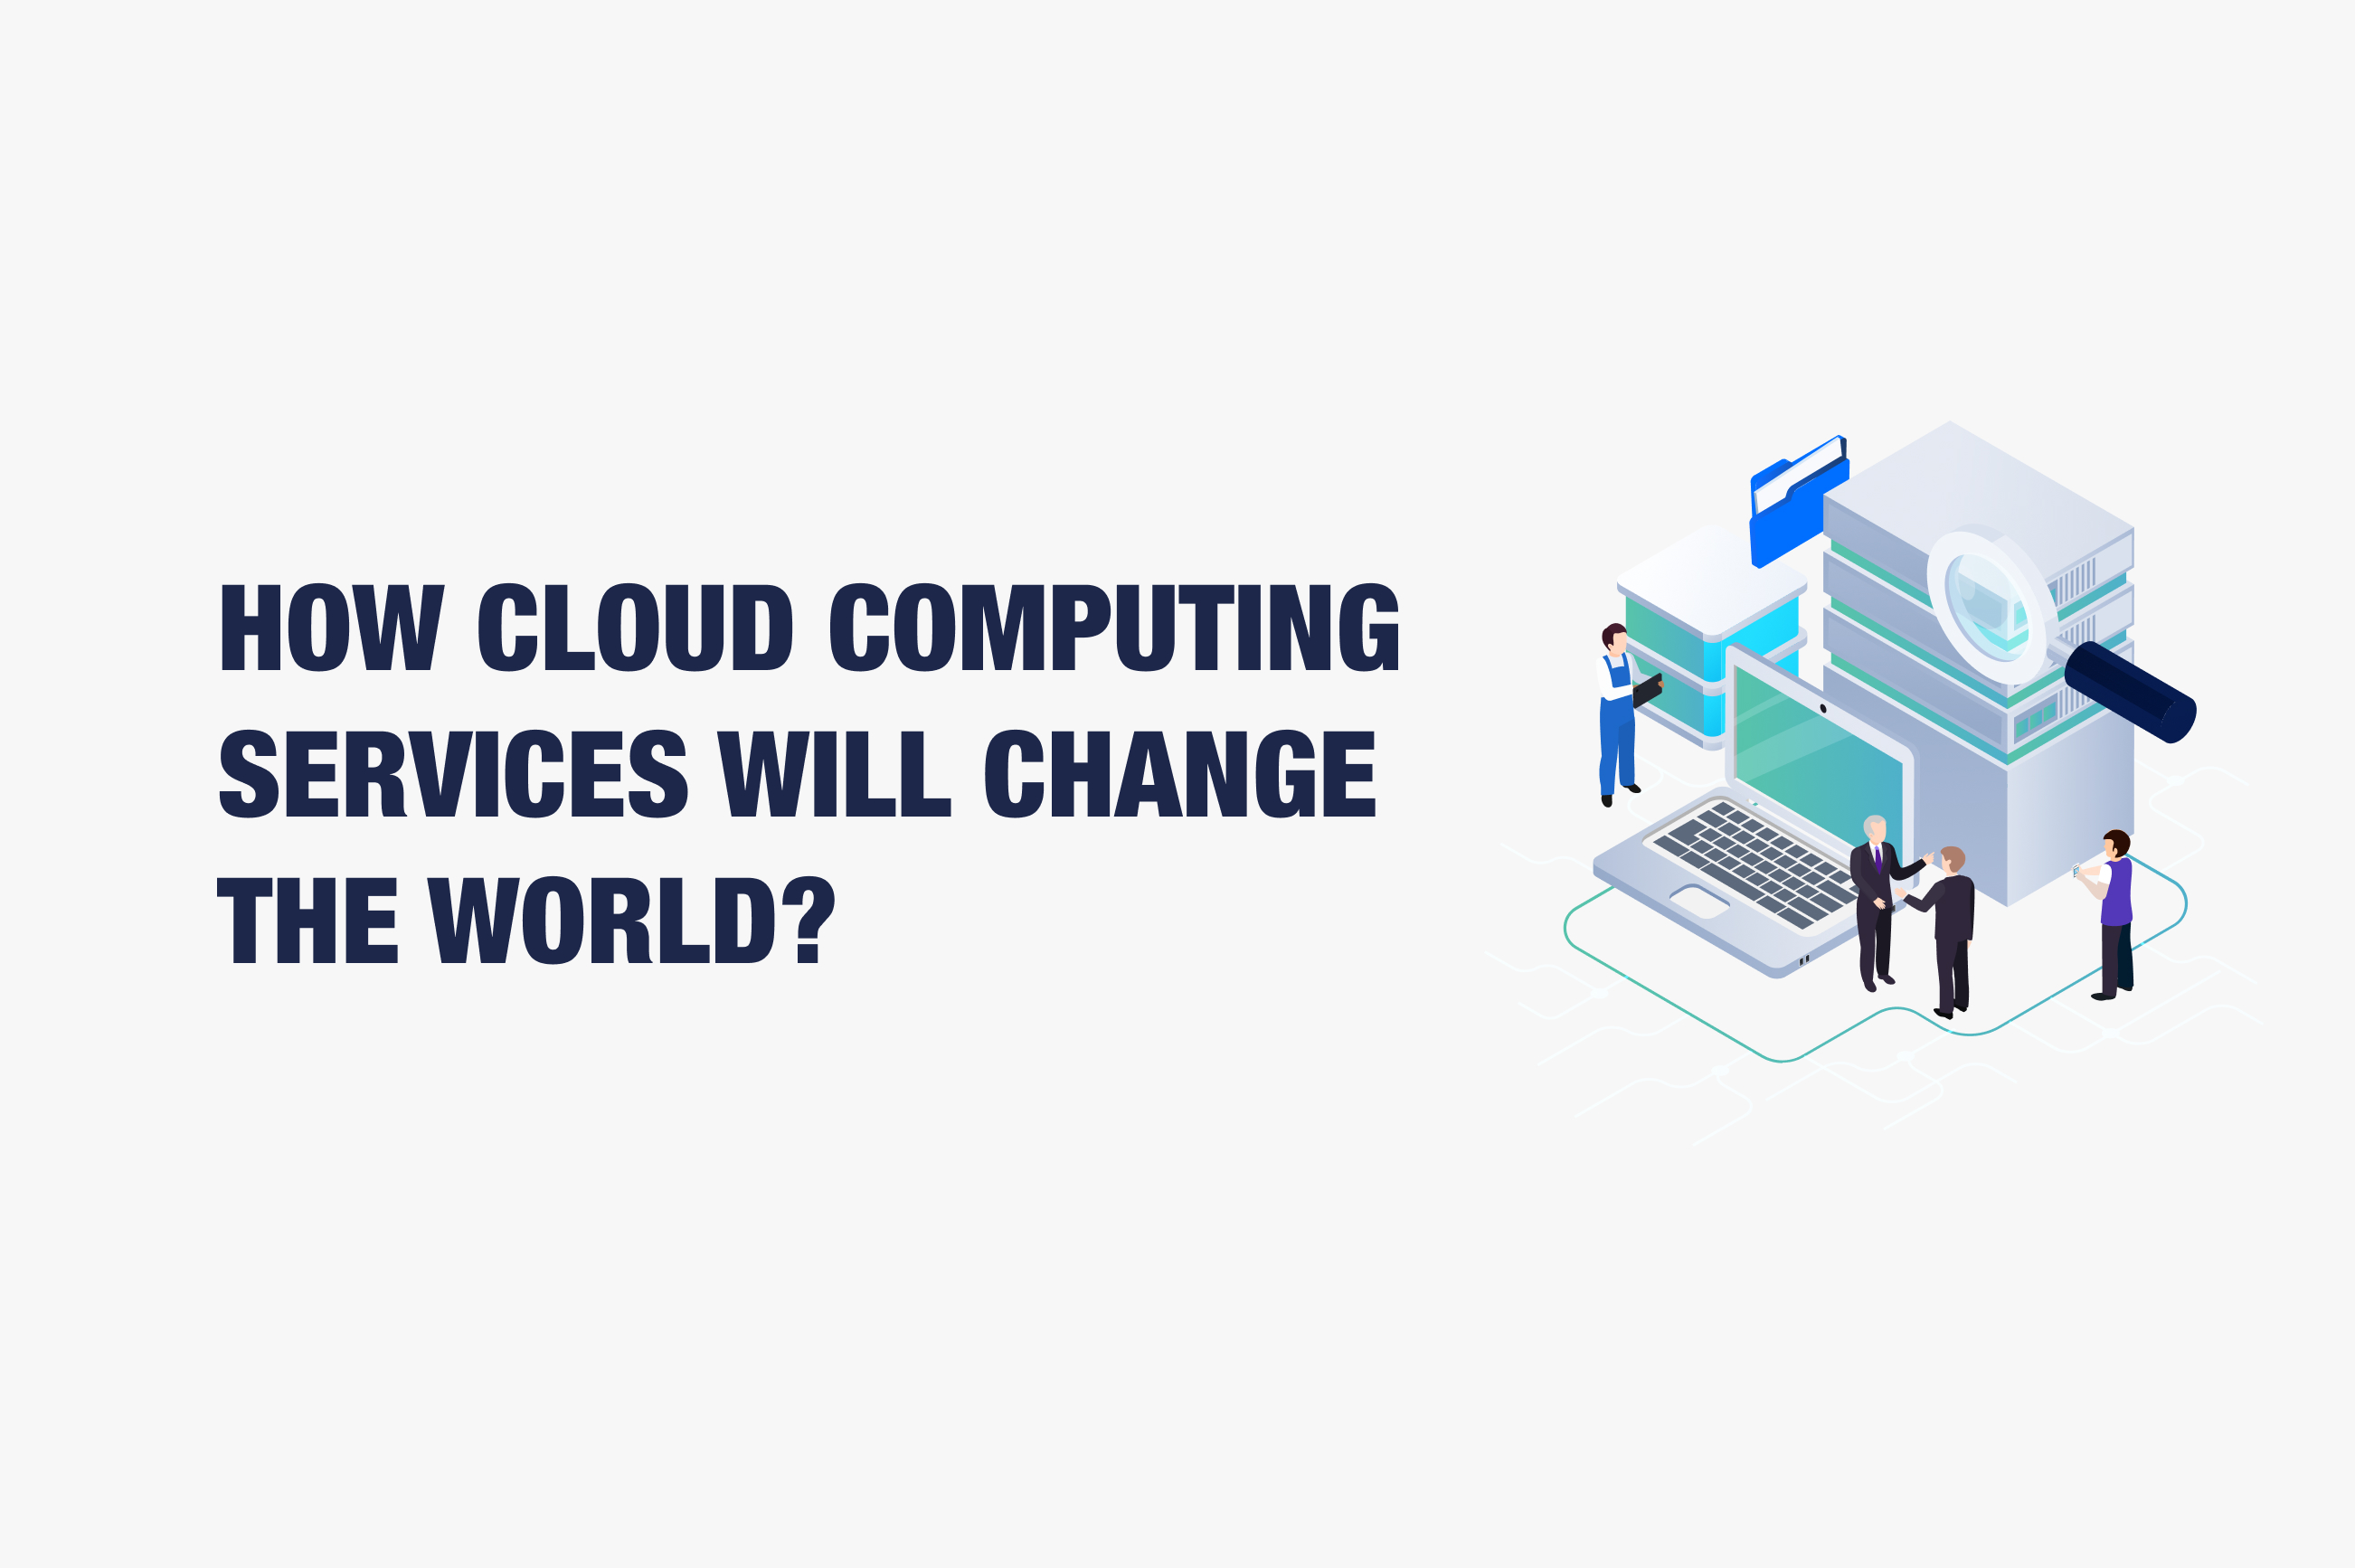 How Cloud Computing Services Will Change the World?